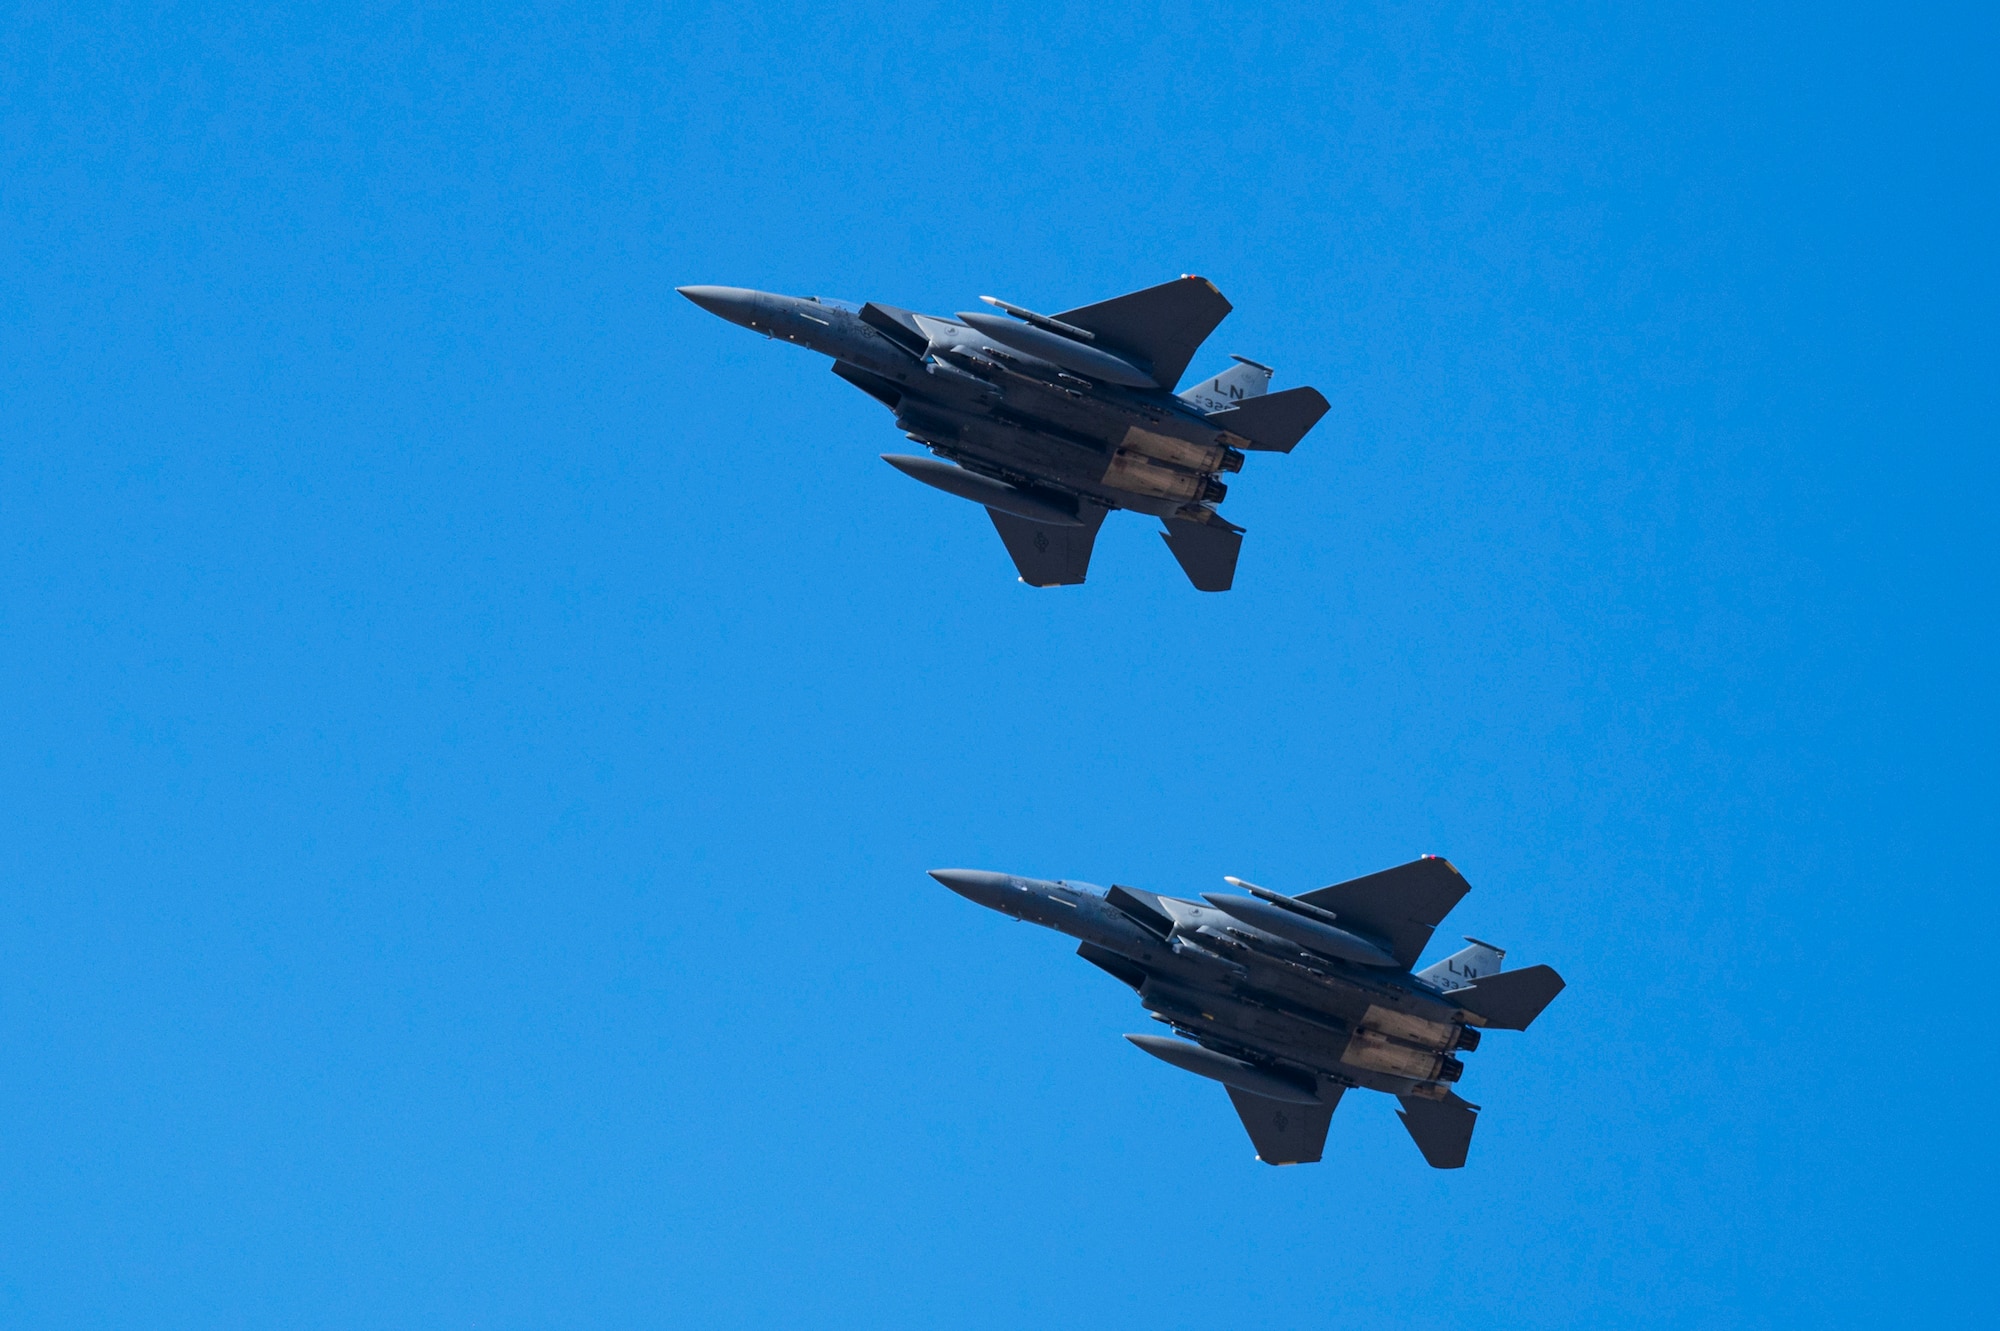 U.S. Air Force F-15E Strike Eagles assigned to the 494th Fighter Squadron, from Royal Air Force Lakenheath, England, prepare to land at Souda Air Base, Greece, July 15, 2022. The two aircraft conducted flight operations from Souda AB to an undisclosed location within the U.S. Central Command area of responsibility, in an effort to exercise cross-combatant command Agile Combat Employment operations. (U.S. Air Force photo by Tech. Sgt. Rachel Maxwell)